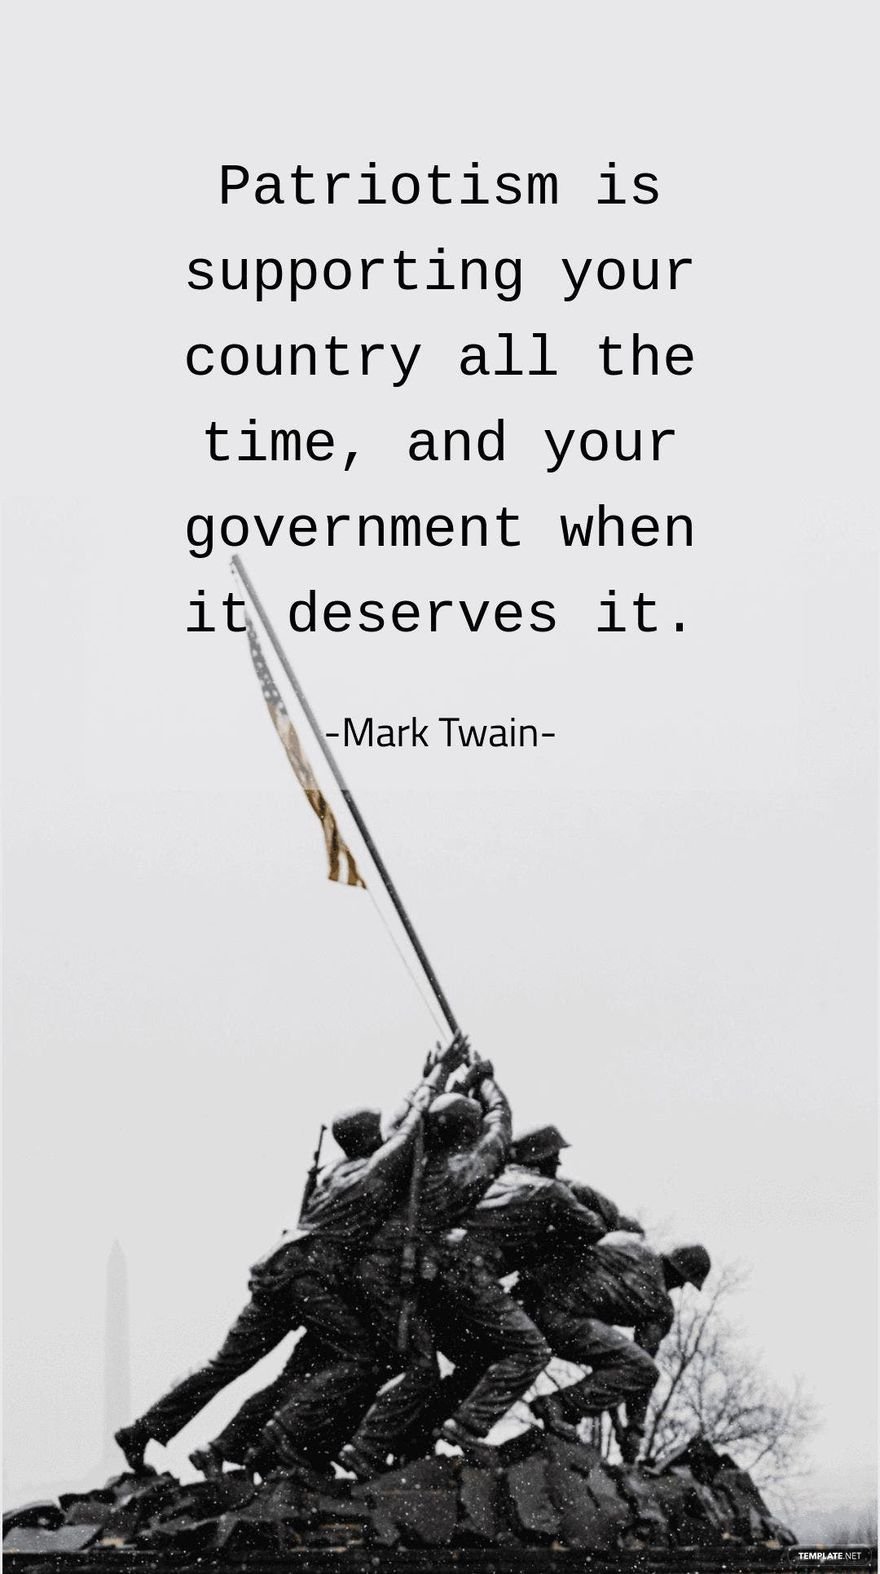 Mark Twain - Patriotism is supporting your country all the time, and your government when it deserves it.